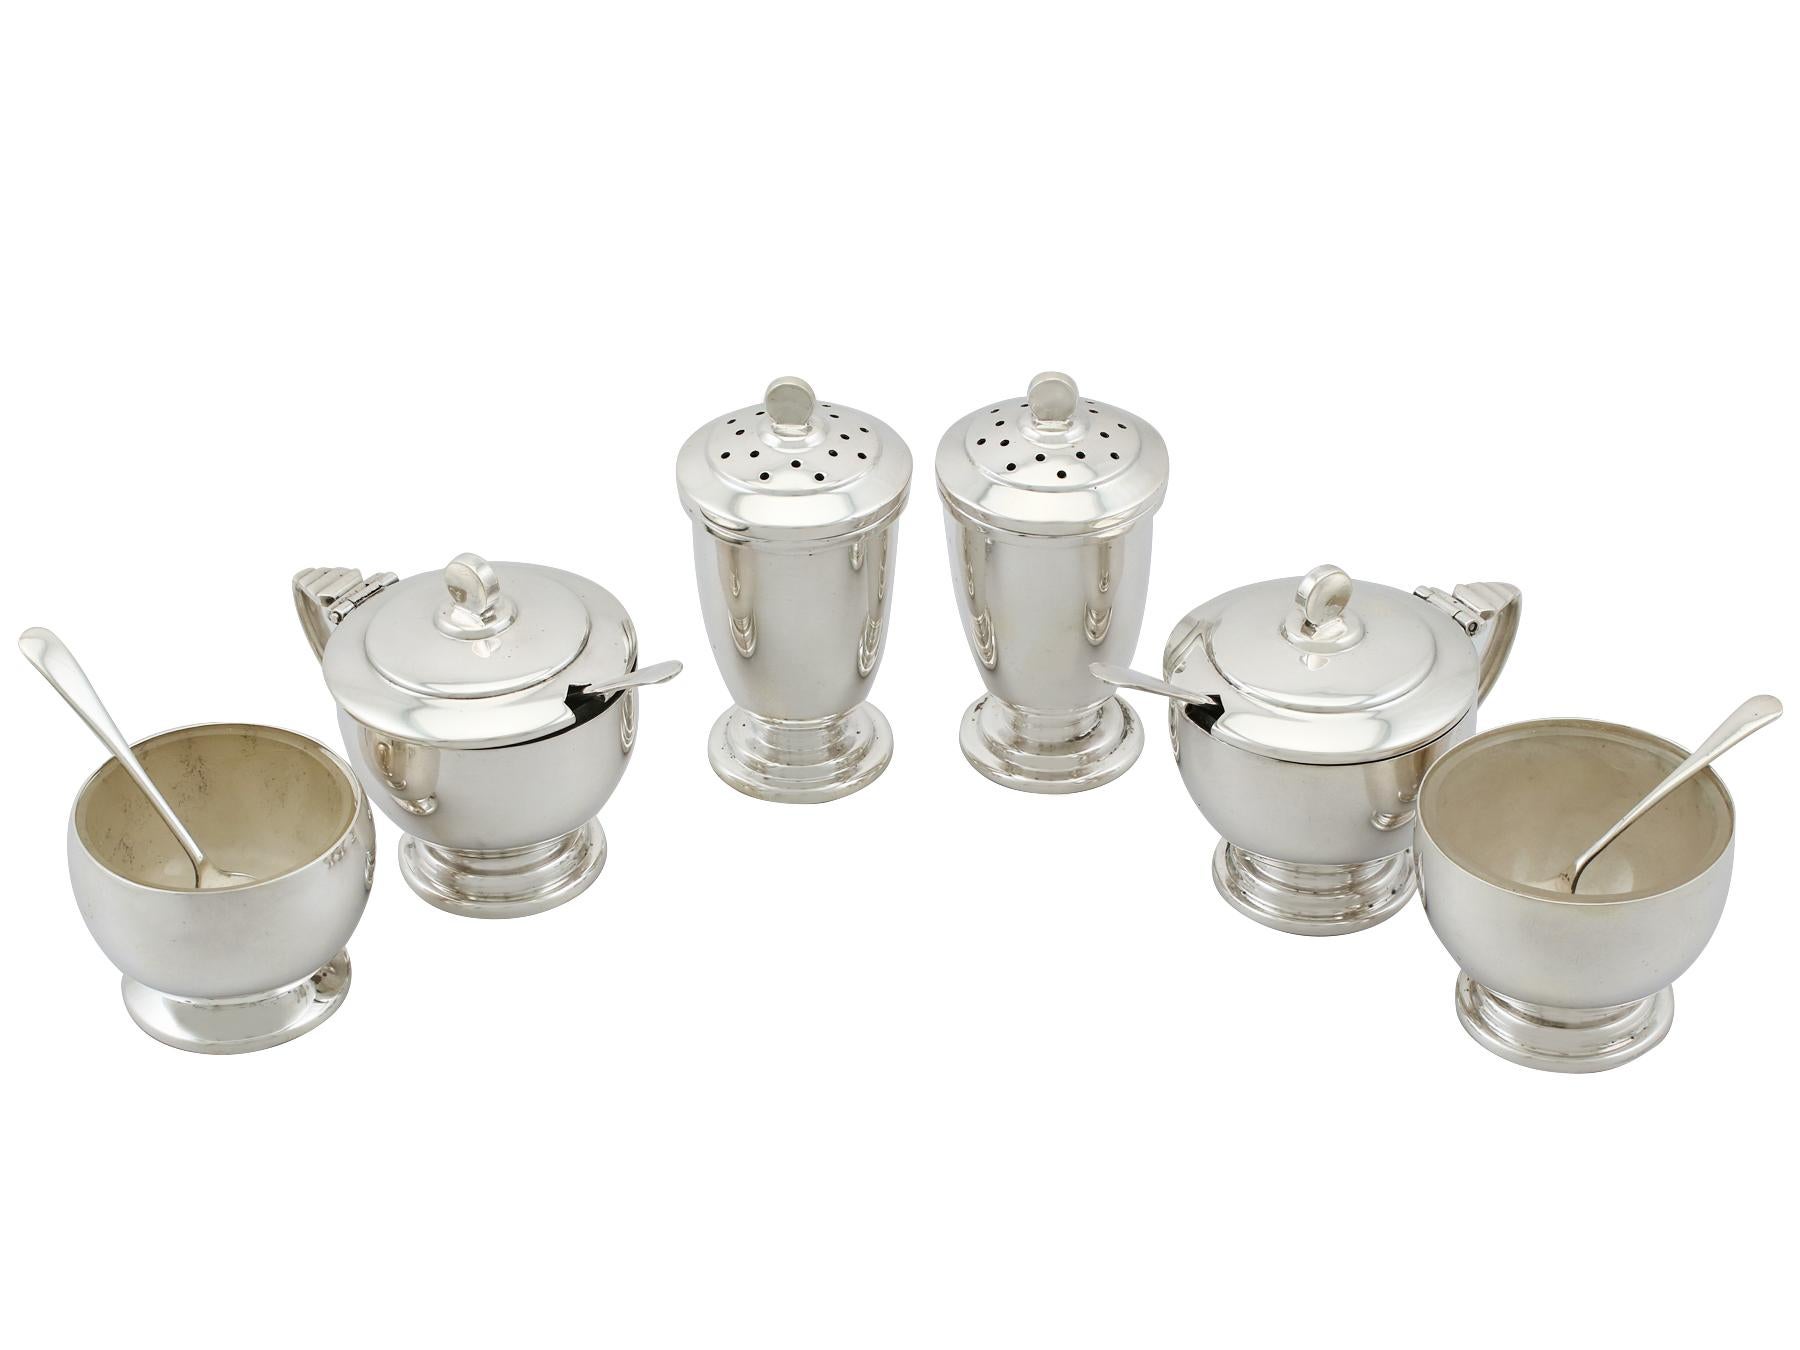 An exceptional, fine and impressive vintage Elizabeth II English sterling silver six piece condiment set in the Art Deco style - boxed; an addition to our dining silverware collection.

This exceptional vintage George VI sterling silver six piece